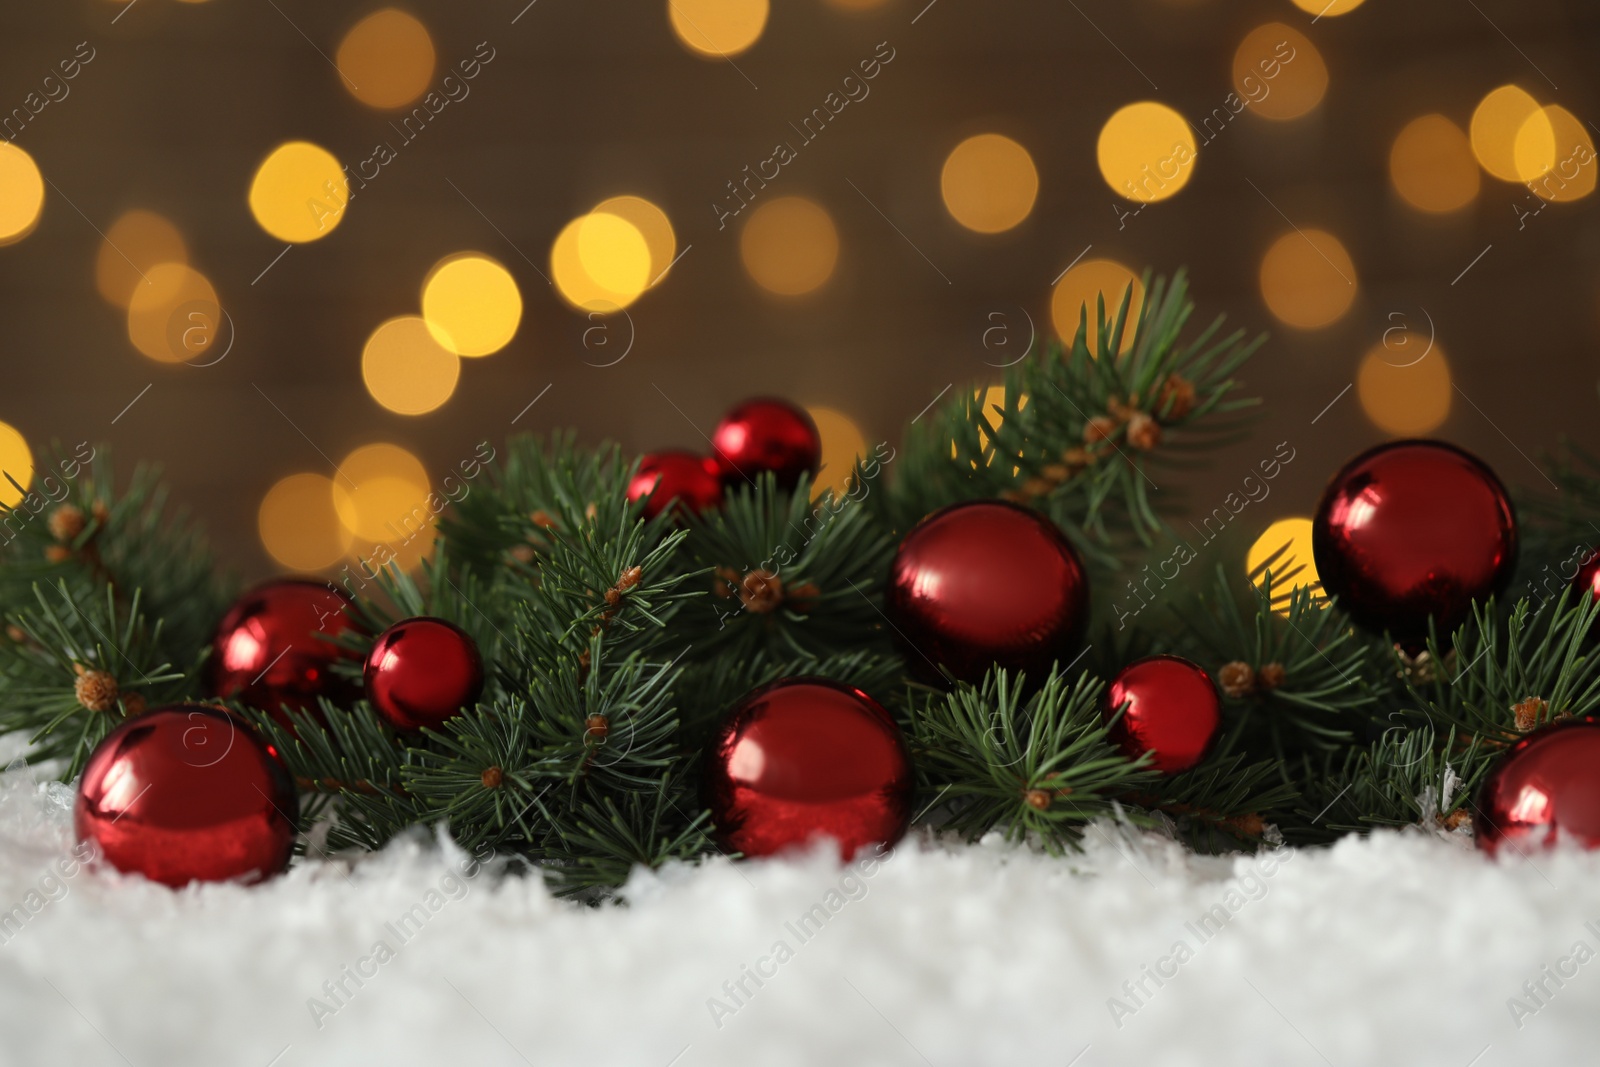 Photo of Fir branches with Christmas balls on snow against blurred festive lights